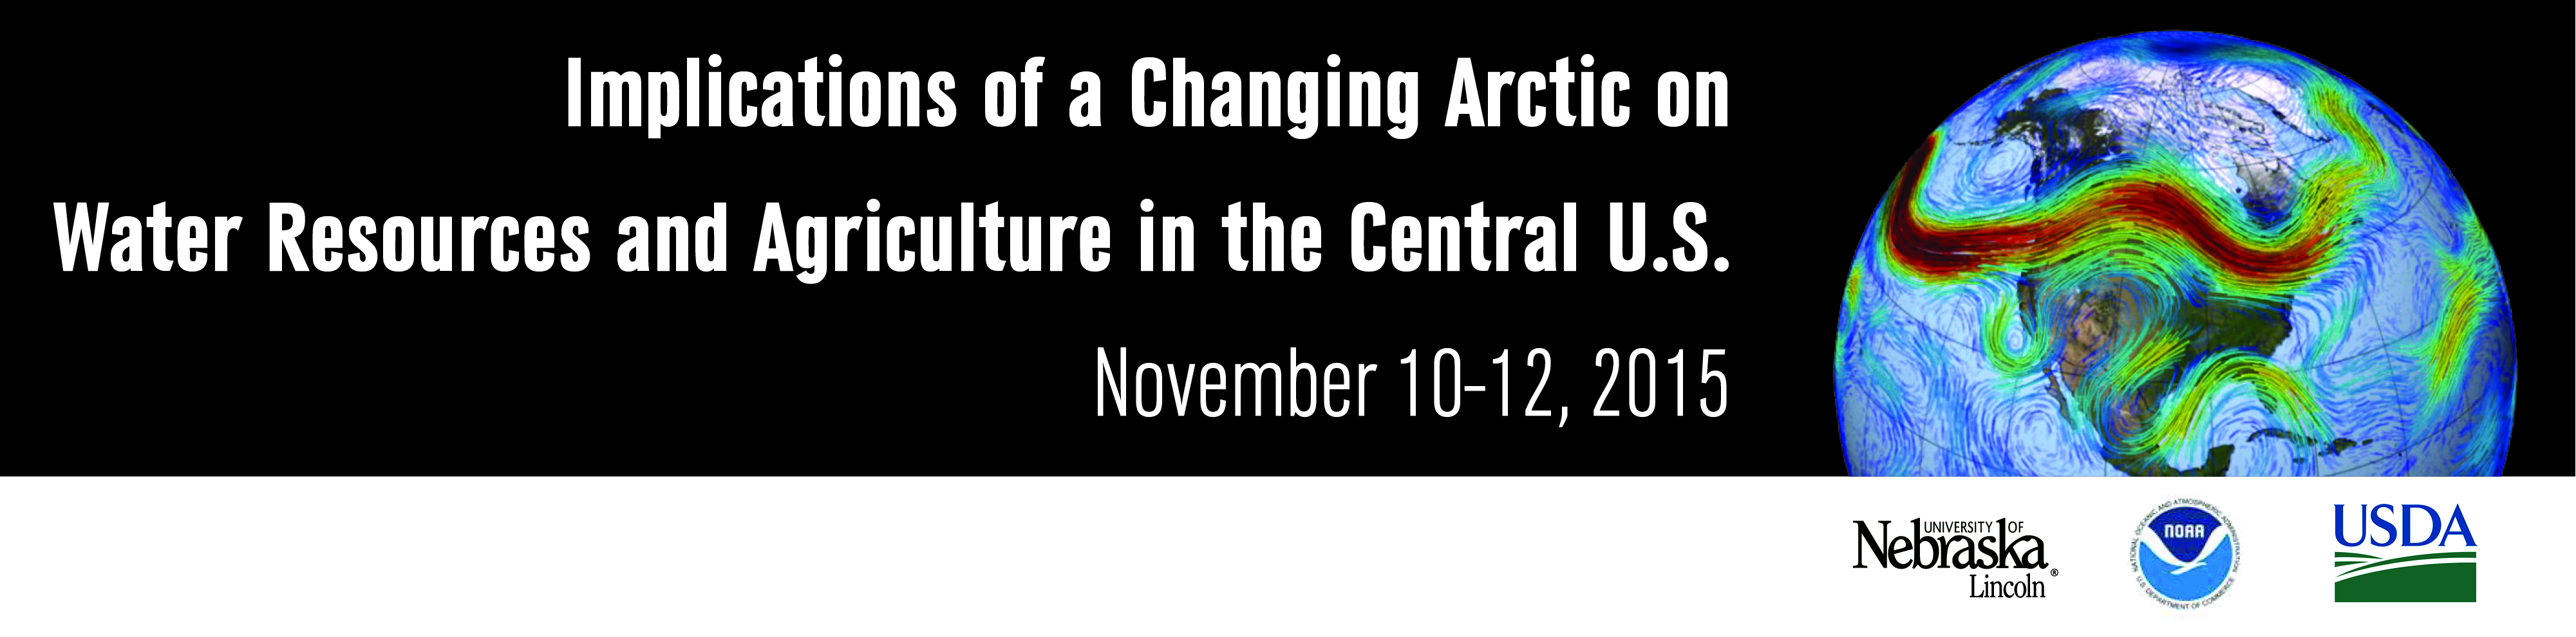 Implications of a Changing Arctic on Water Resources and Agriculture in the Central U.S. November 10-12, 2015 University of Nebrasak-Lincoln